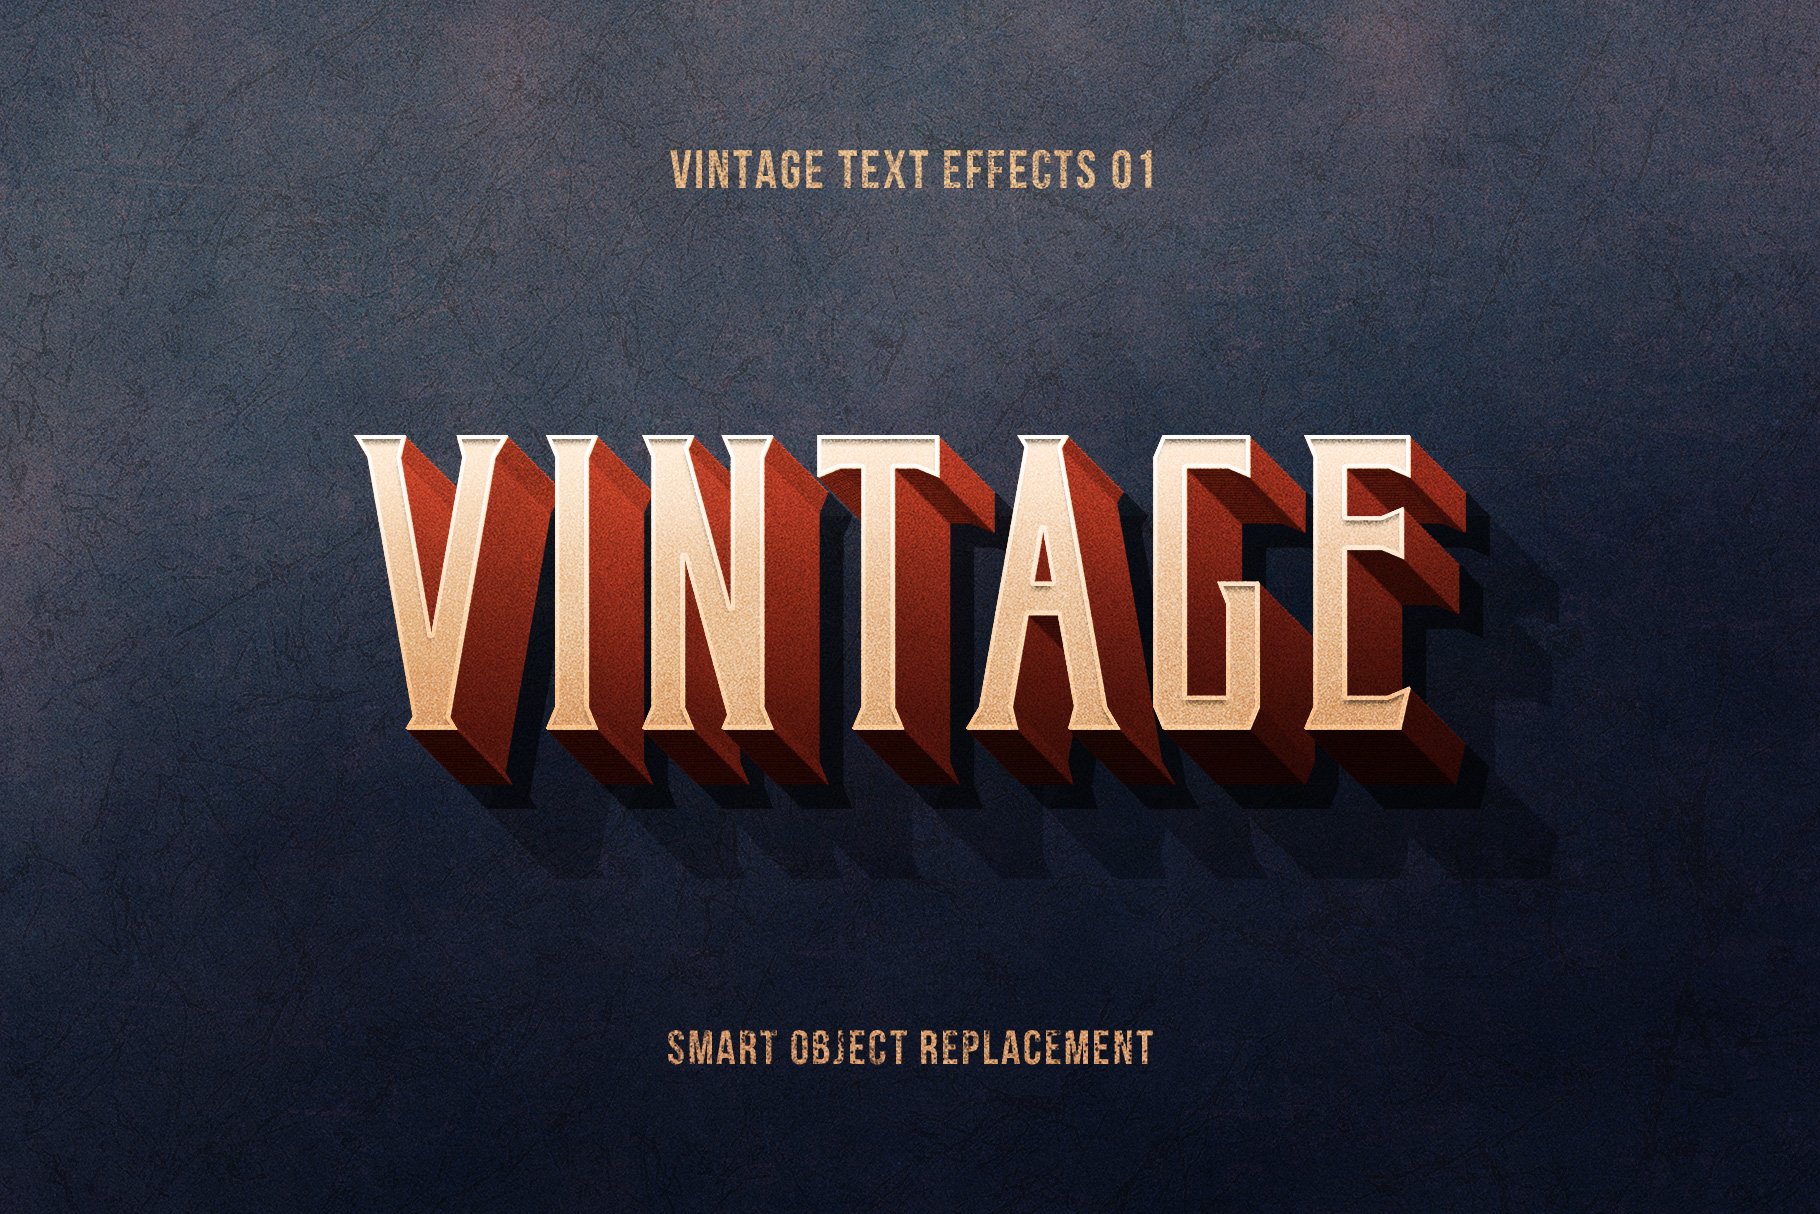 Retrica: Vintage Text Effects Packpreview image.